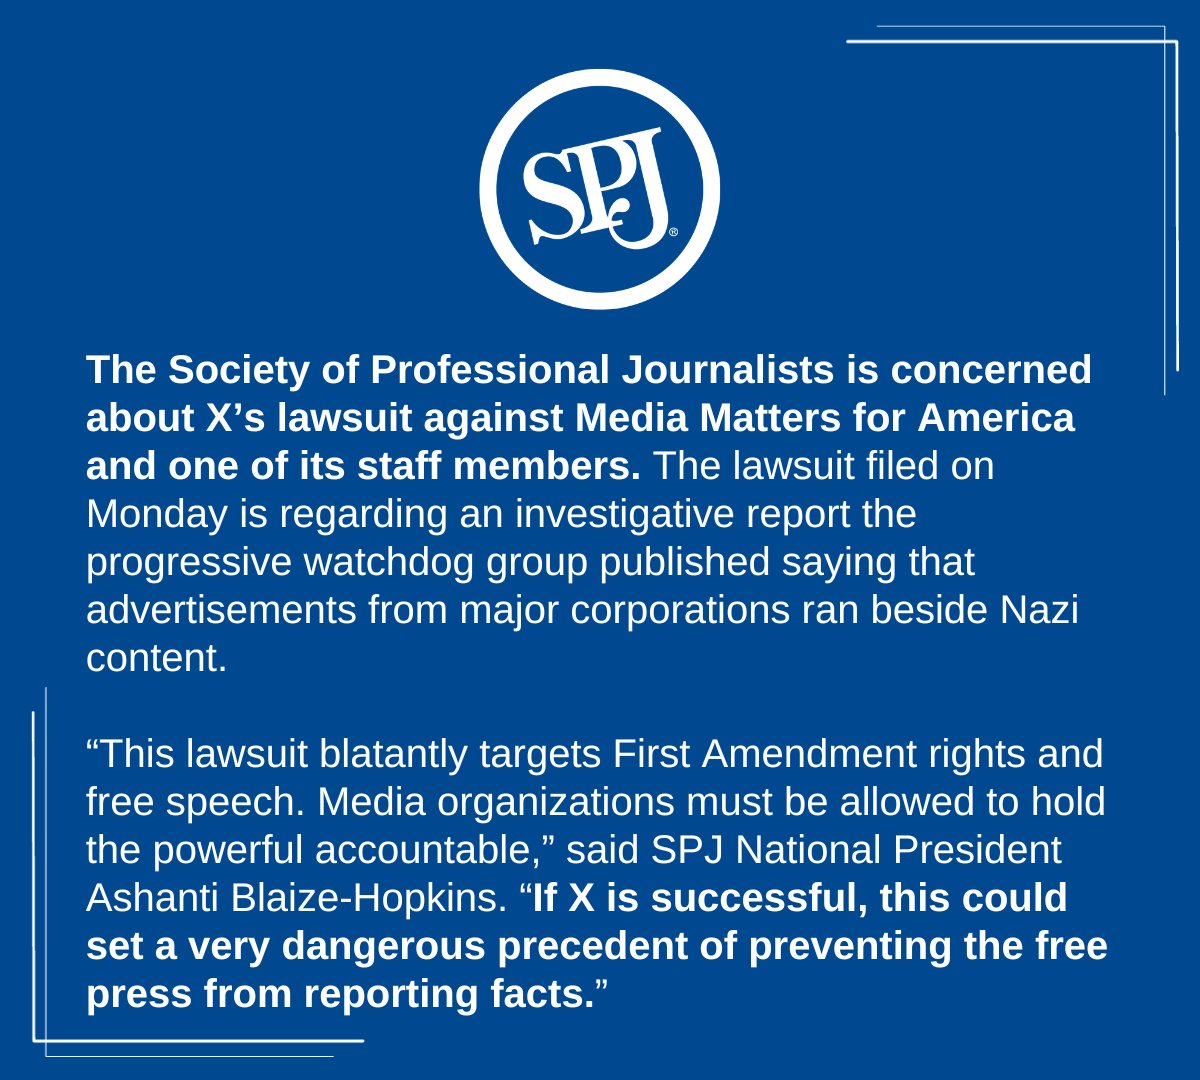 SPJ is concerned about X’s lawsuit against @mmfa. 'This lawsuit blatantly targets First Amendment rights and free speech. Media organizations must be allowed to hold the powerful accountable,” said SPJ President @AshantiBlaize. spj.org/news.asp?REF=2…